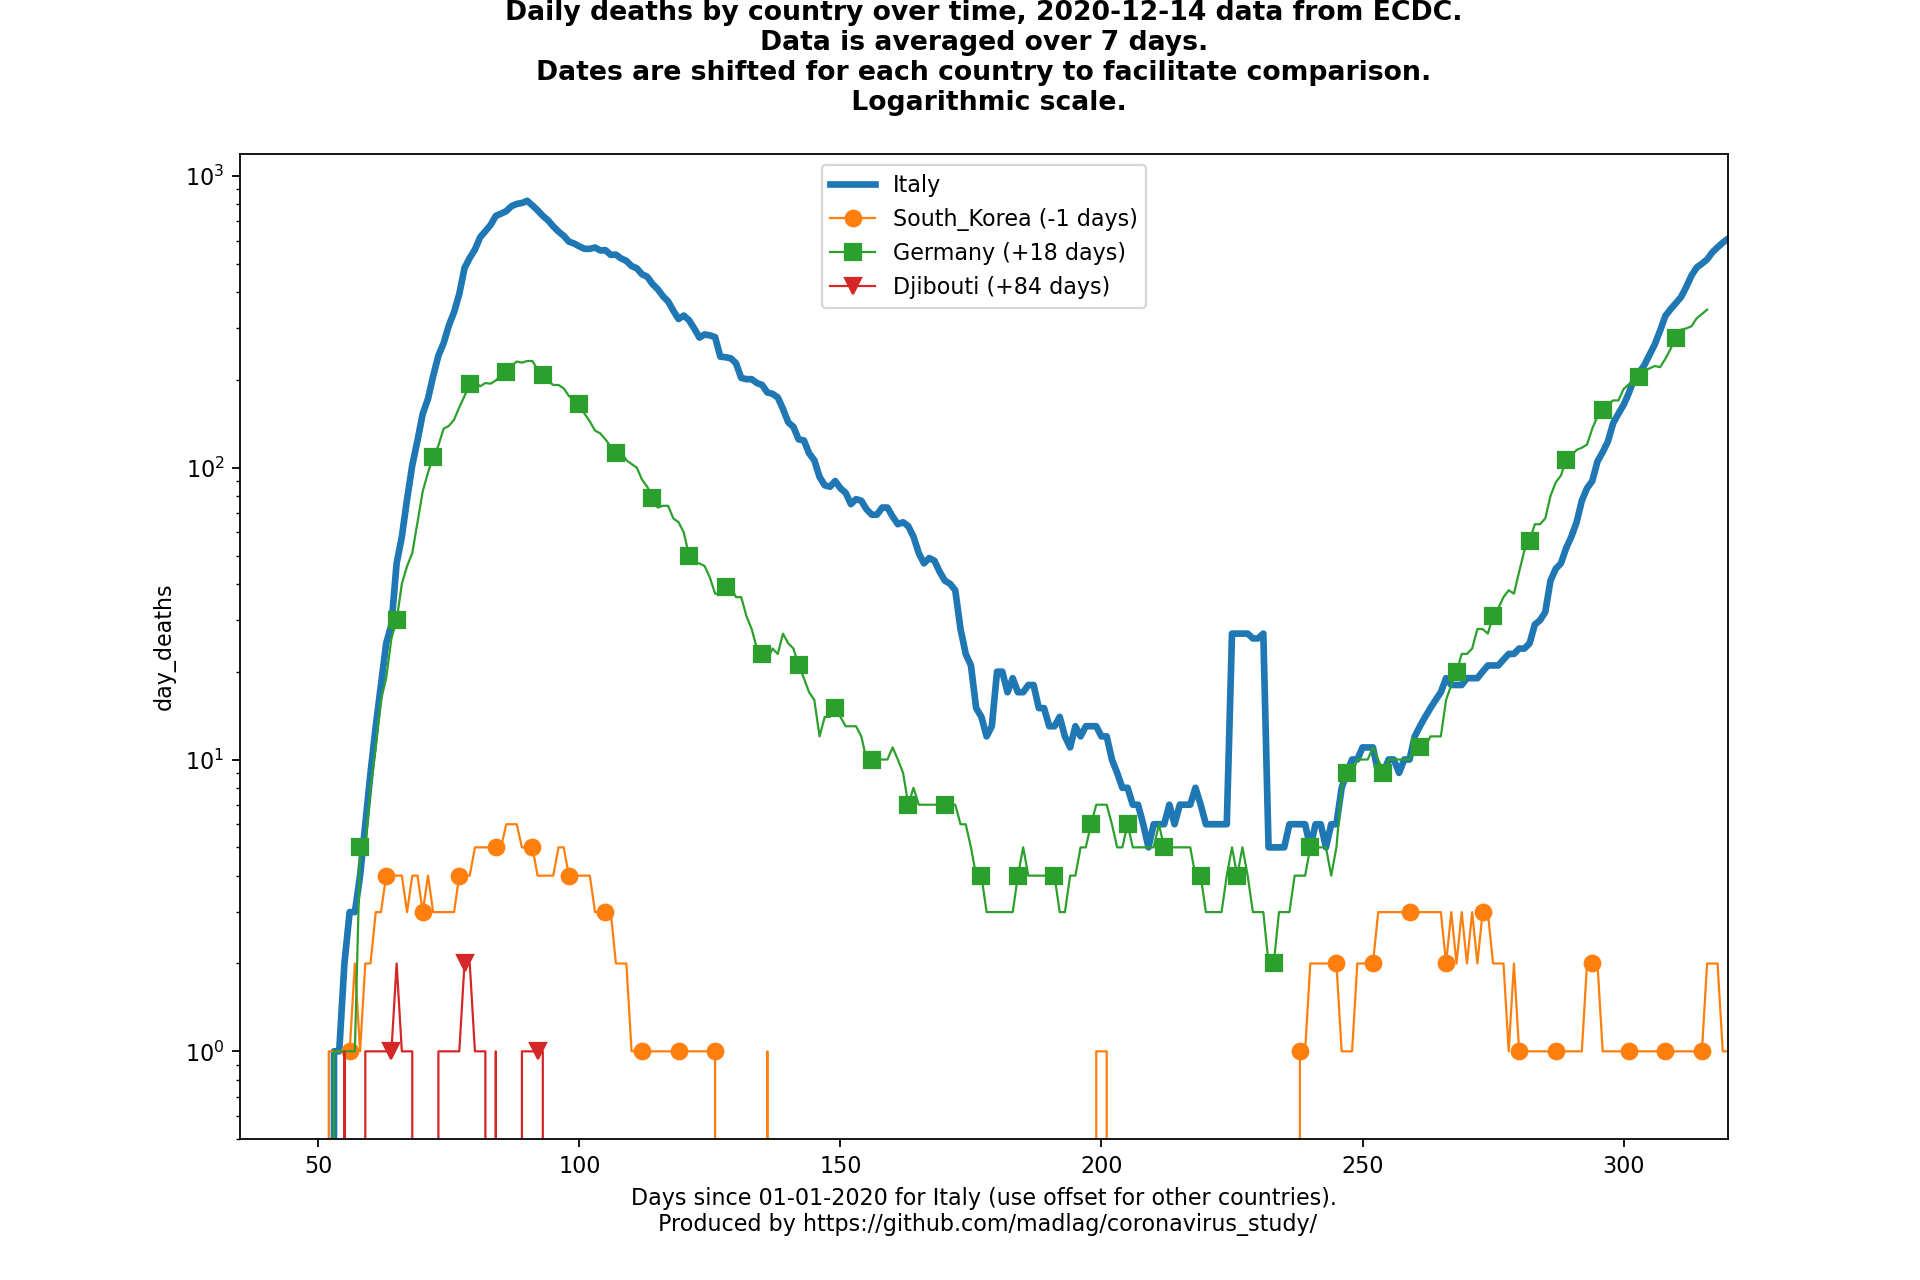 Djibouti covid-19 daily deaths animated chart